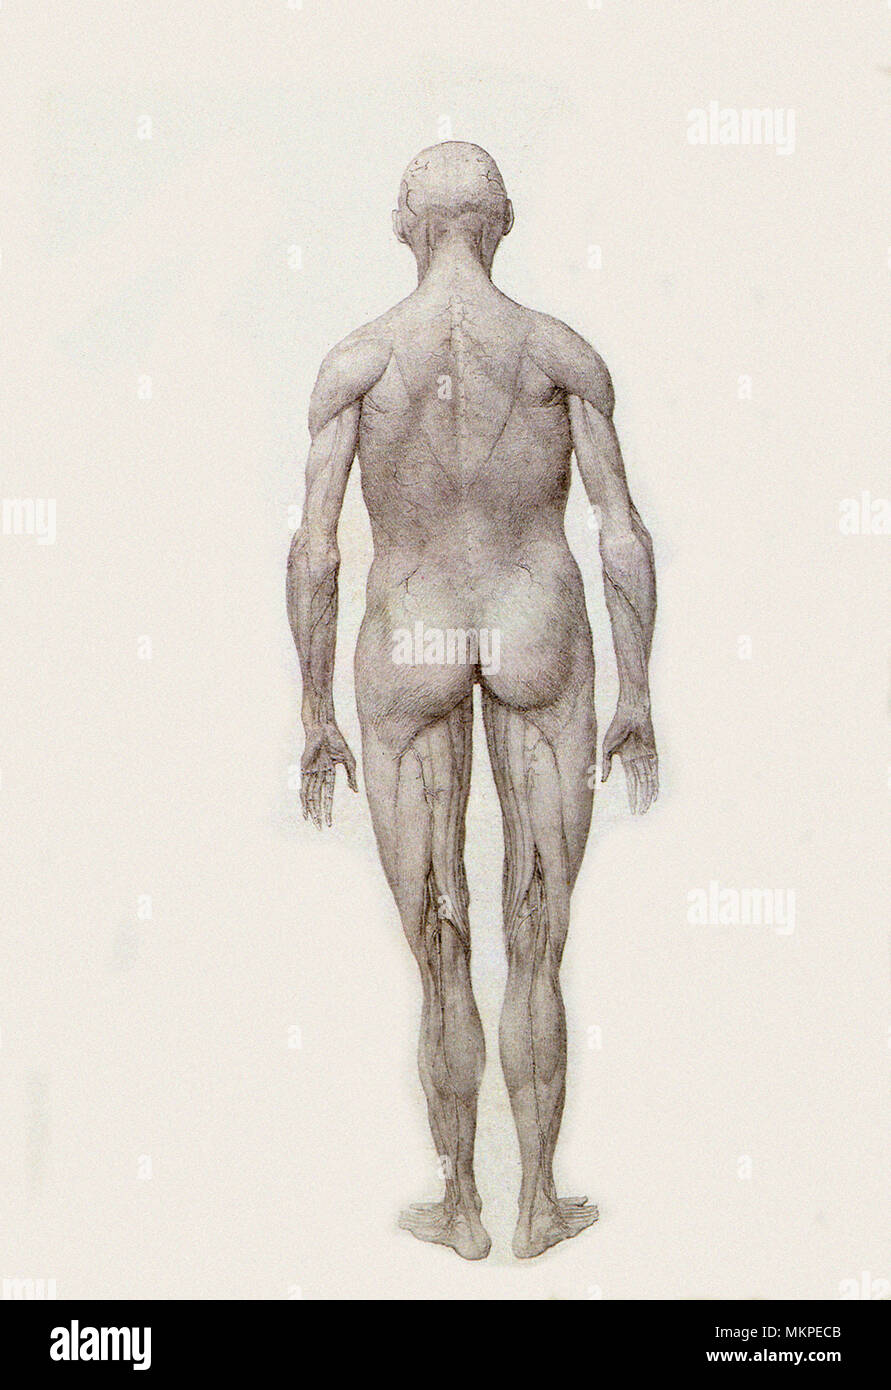 Human Being, Posterior View, Partially Dissected Stock Photo